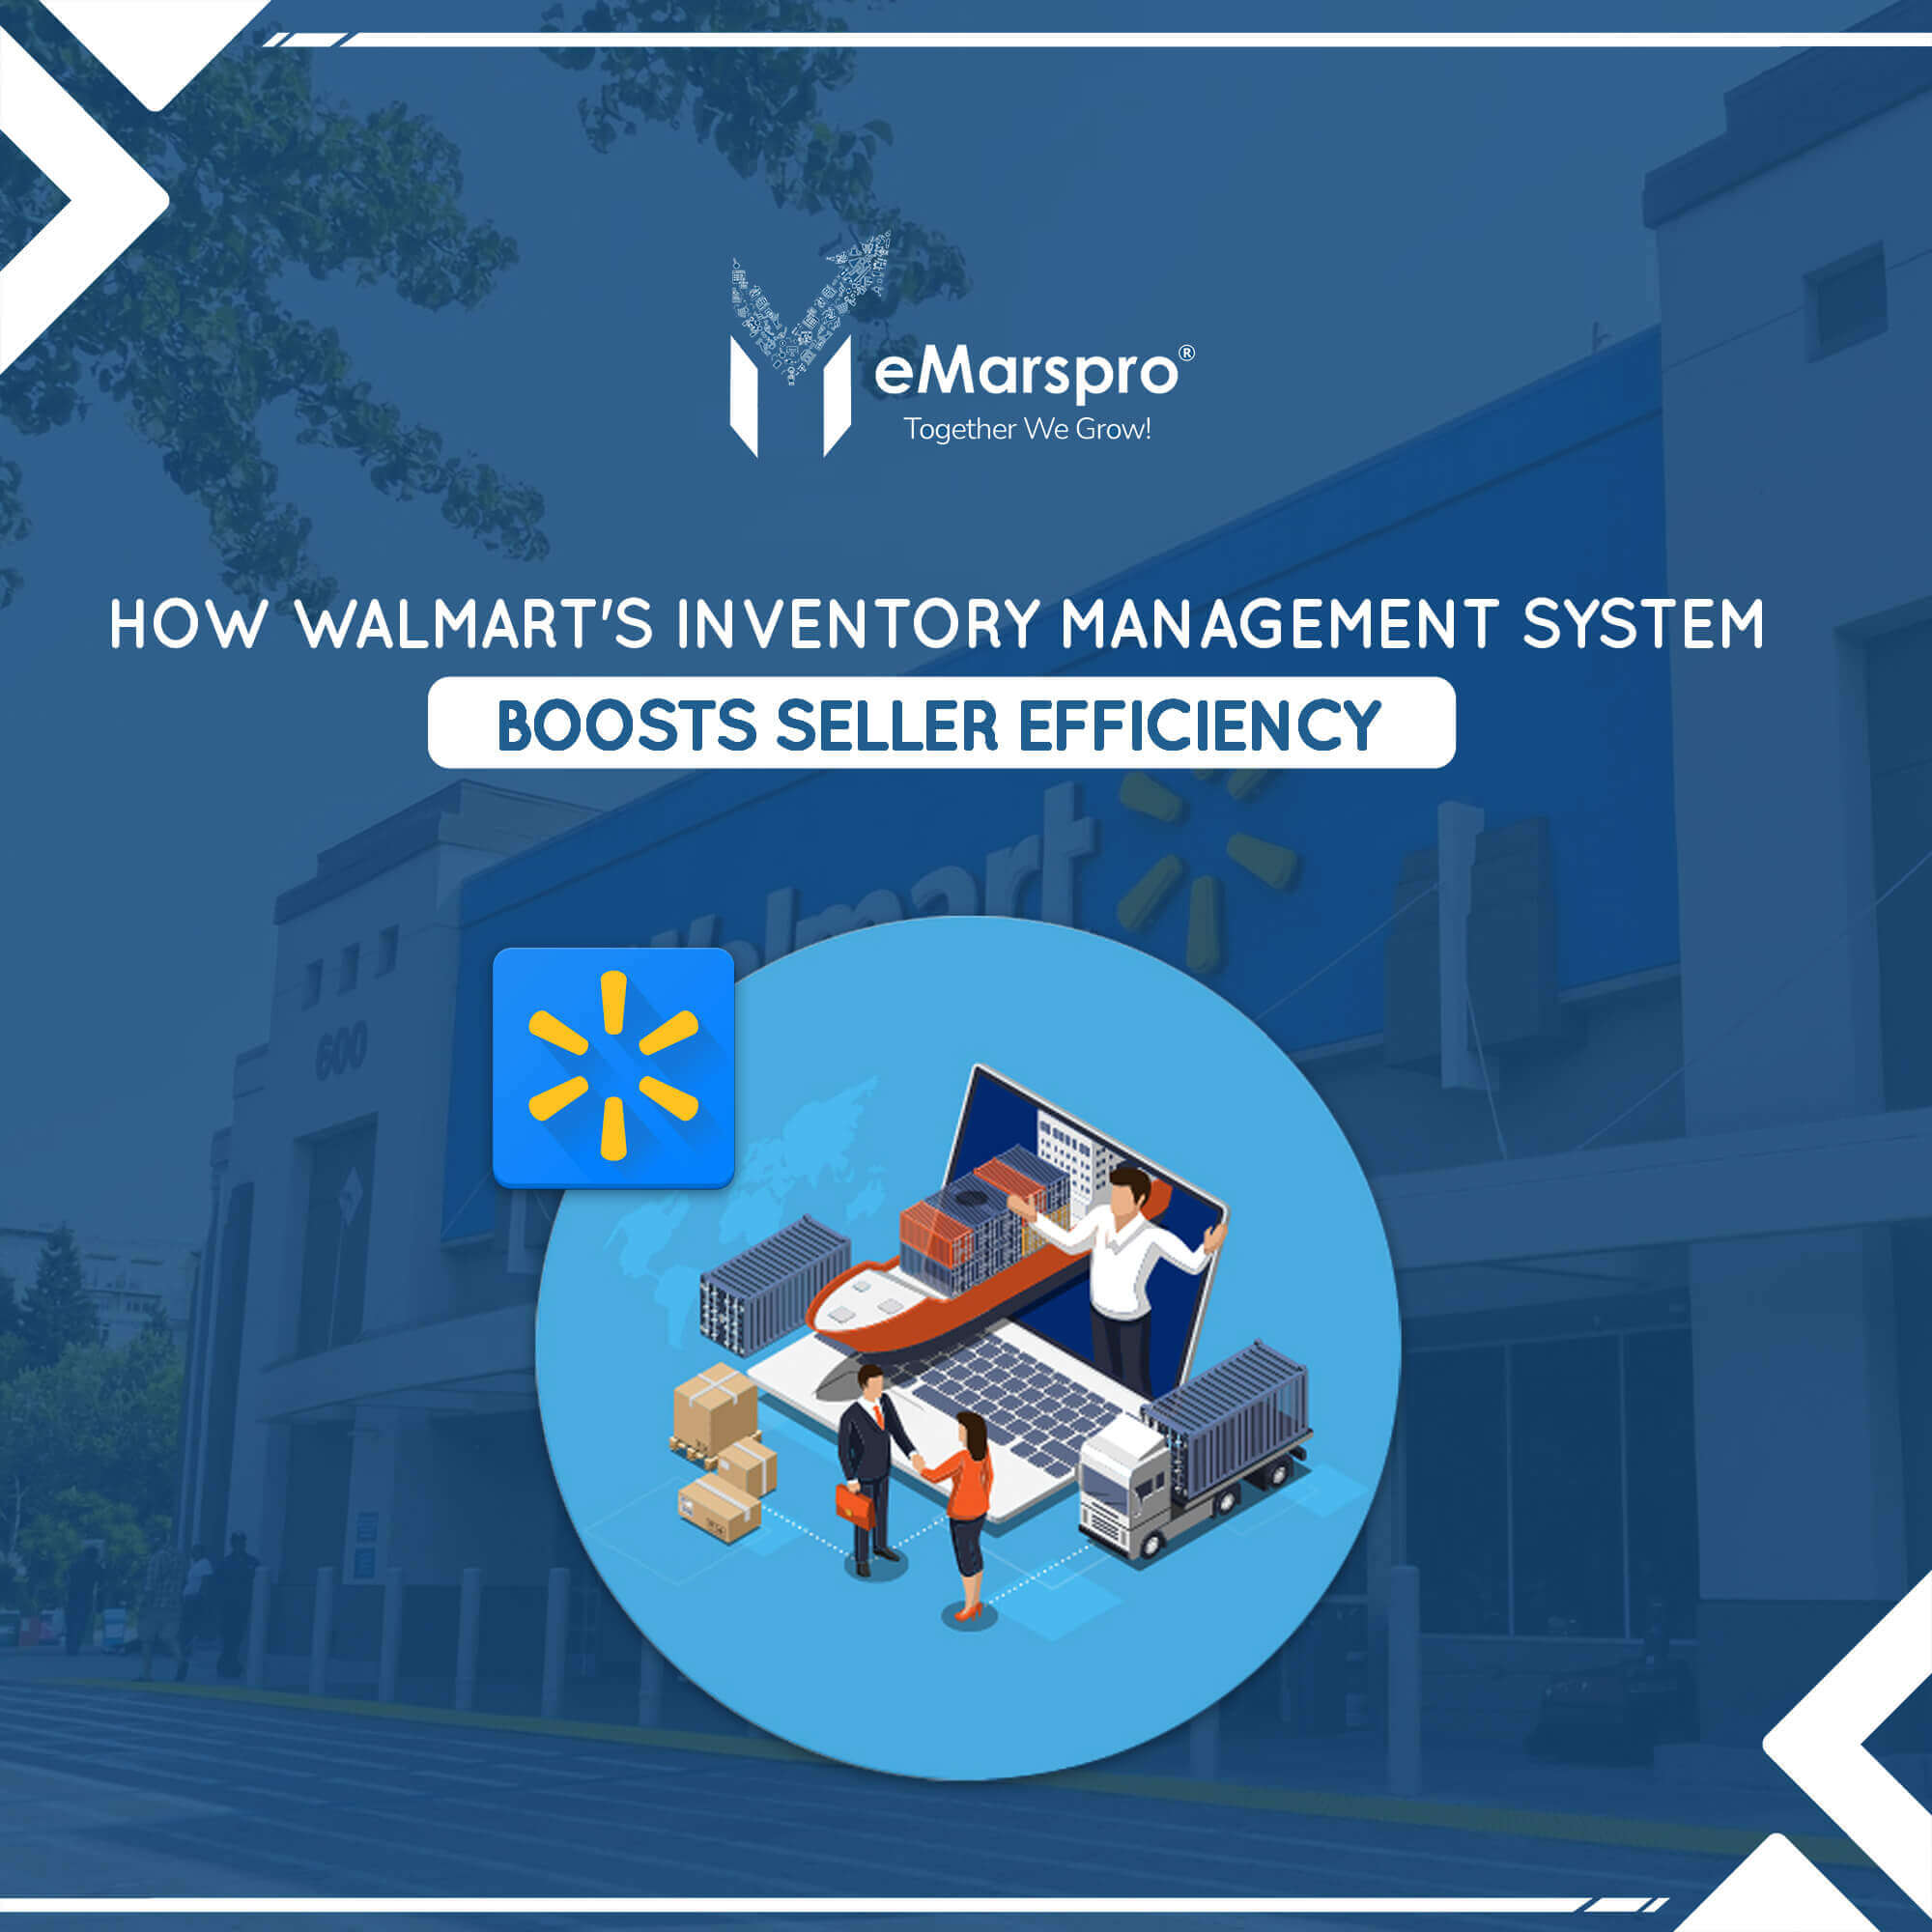 How Walmart's Inventory Management System Boosts Seller Efficiency